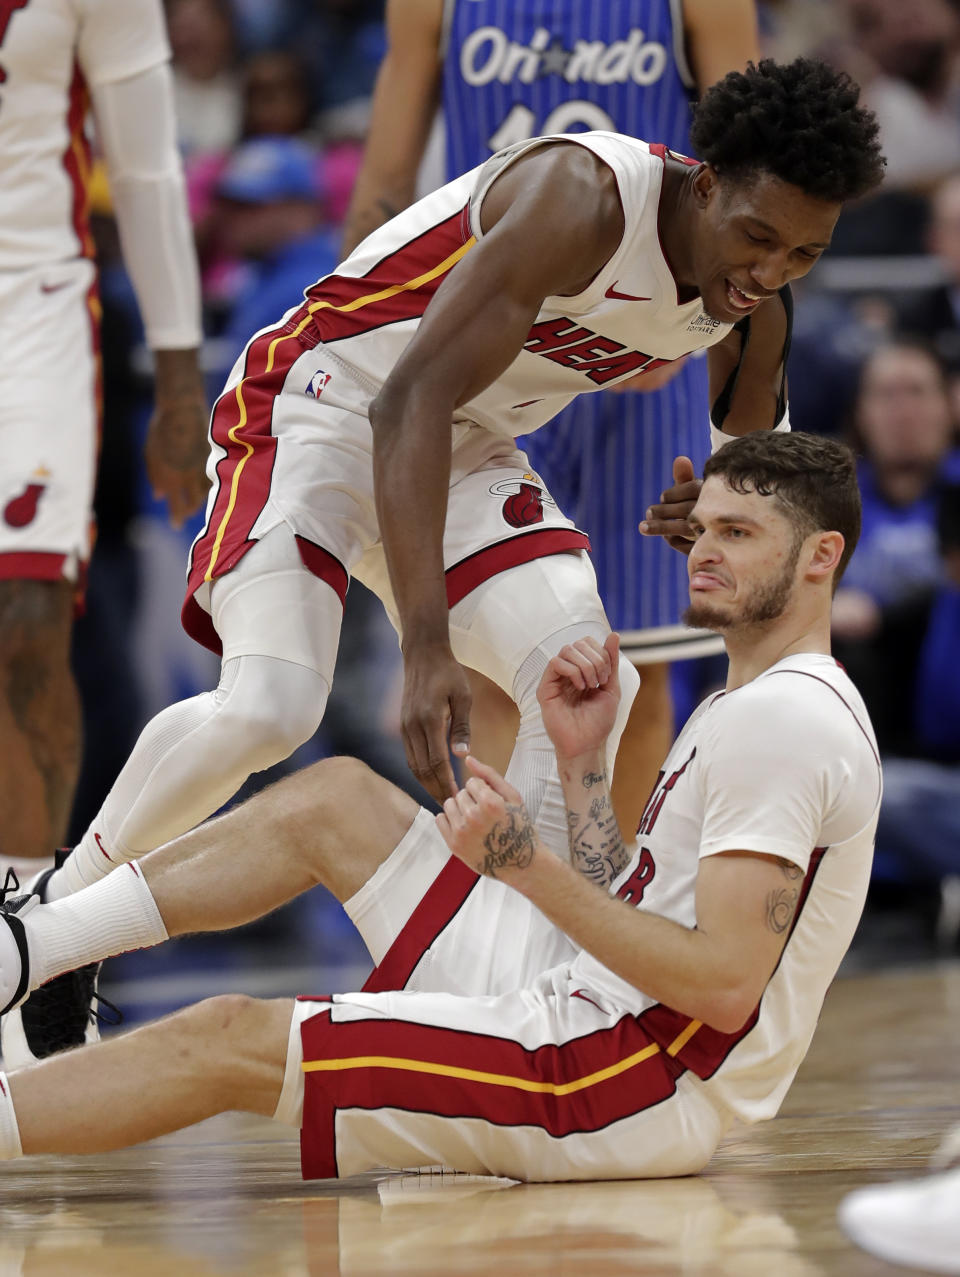 Miami Heat's Tyler Johnson, right, pumps his fists after making a three-point basket against the Orlando Magic and drawing a foul as teammate Josh Richardson comes in to help him up during the second half of an NBA basketball game, Sunday, Dec. 23, 2018, in Orlando, Fla. (AP Photo/John Raoux)